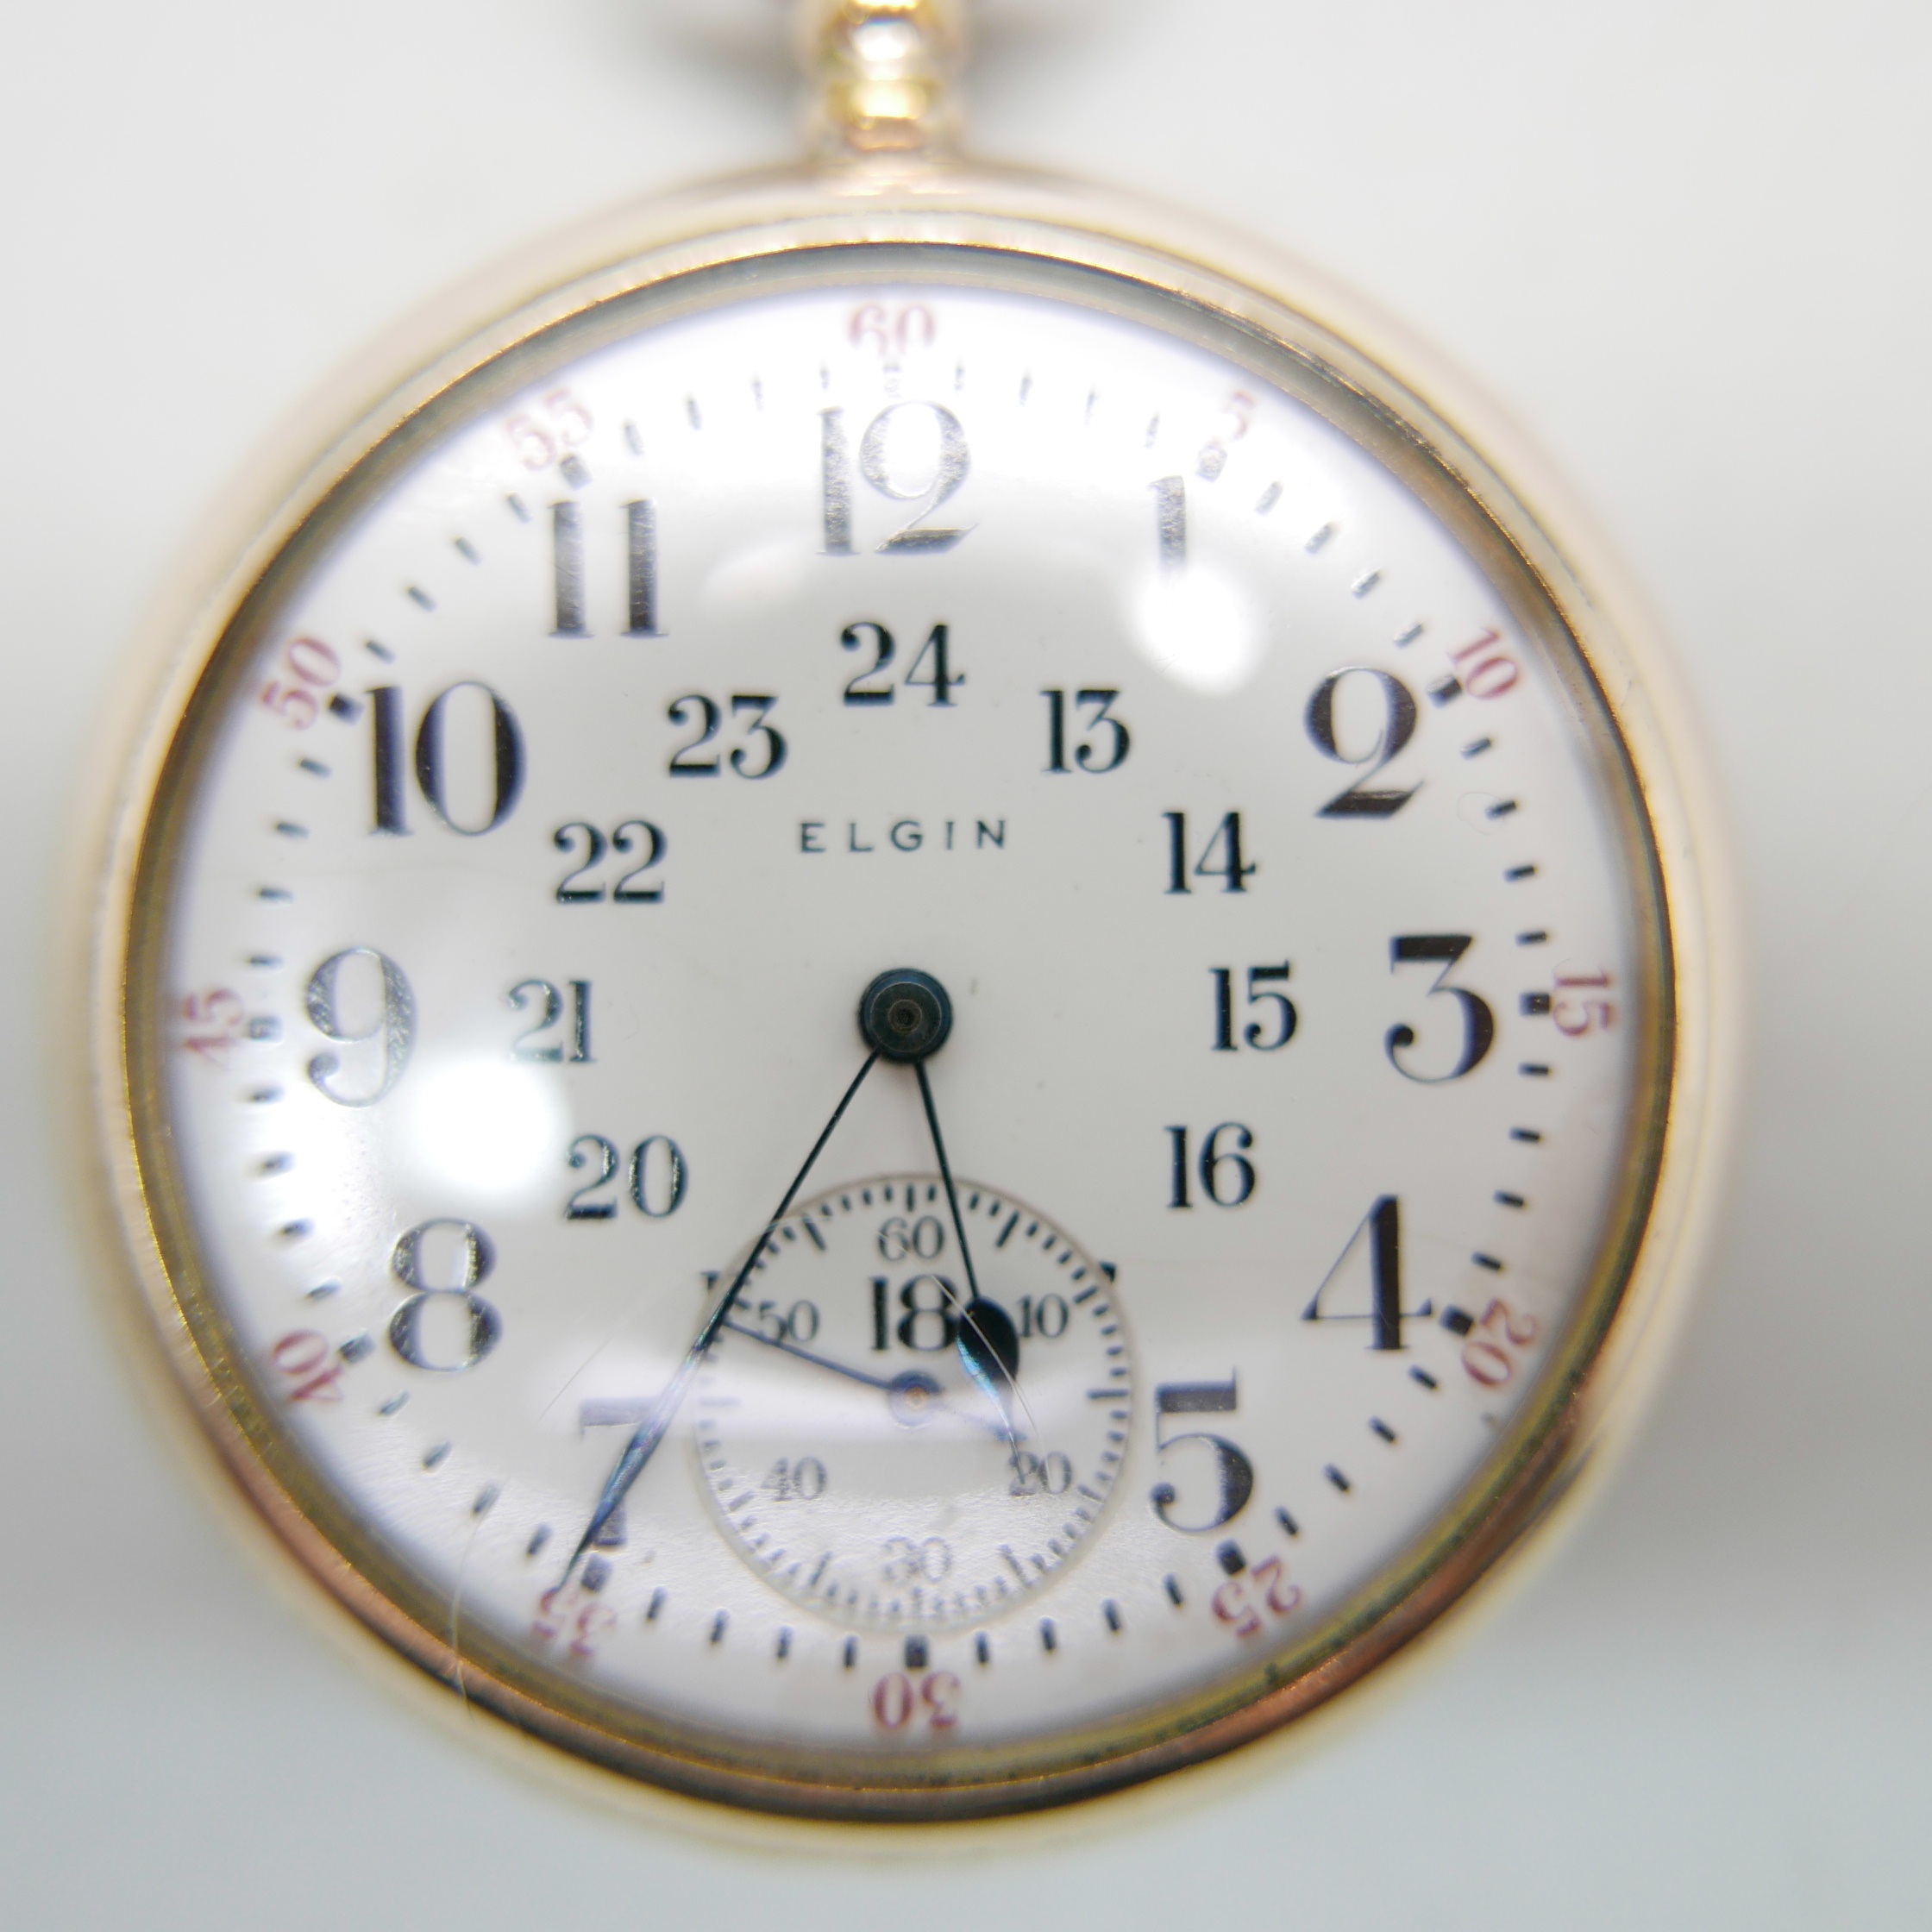 A gold plated Elgin pocket watch with railroad dial, screw back case - Image 2 of 2